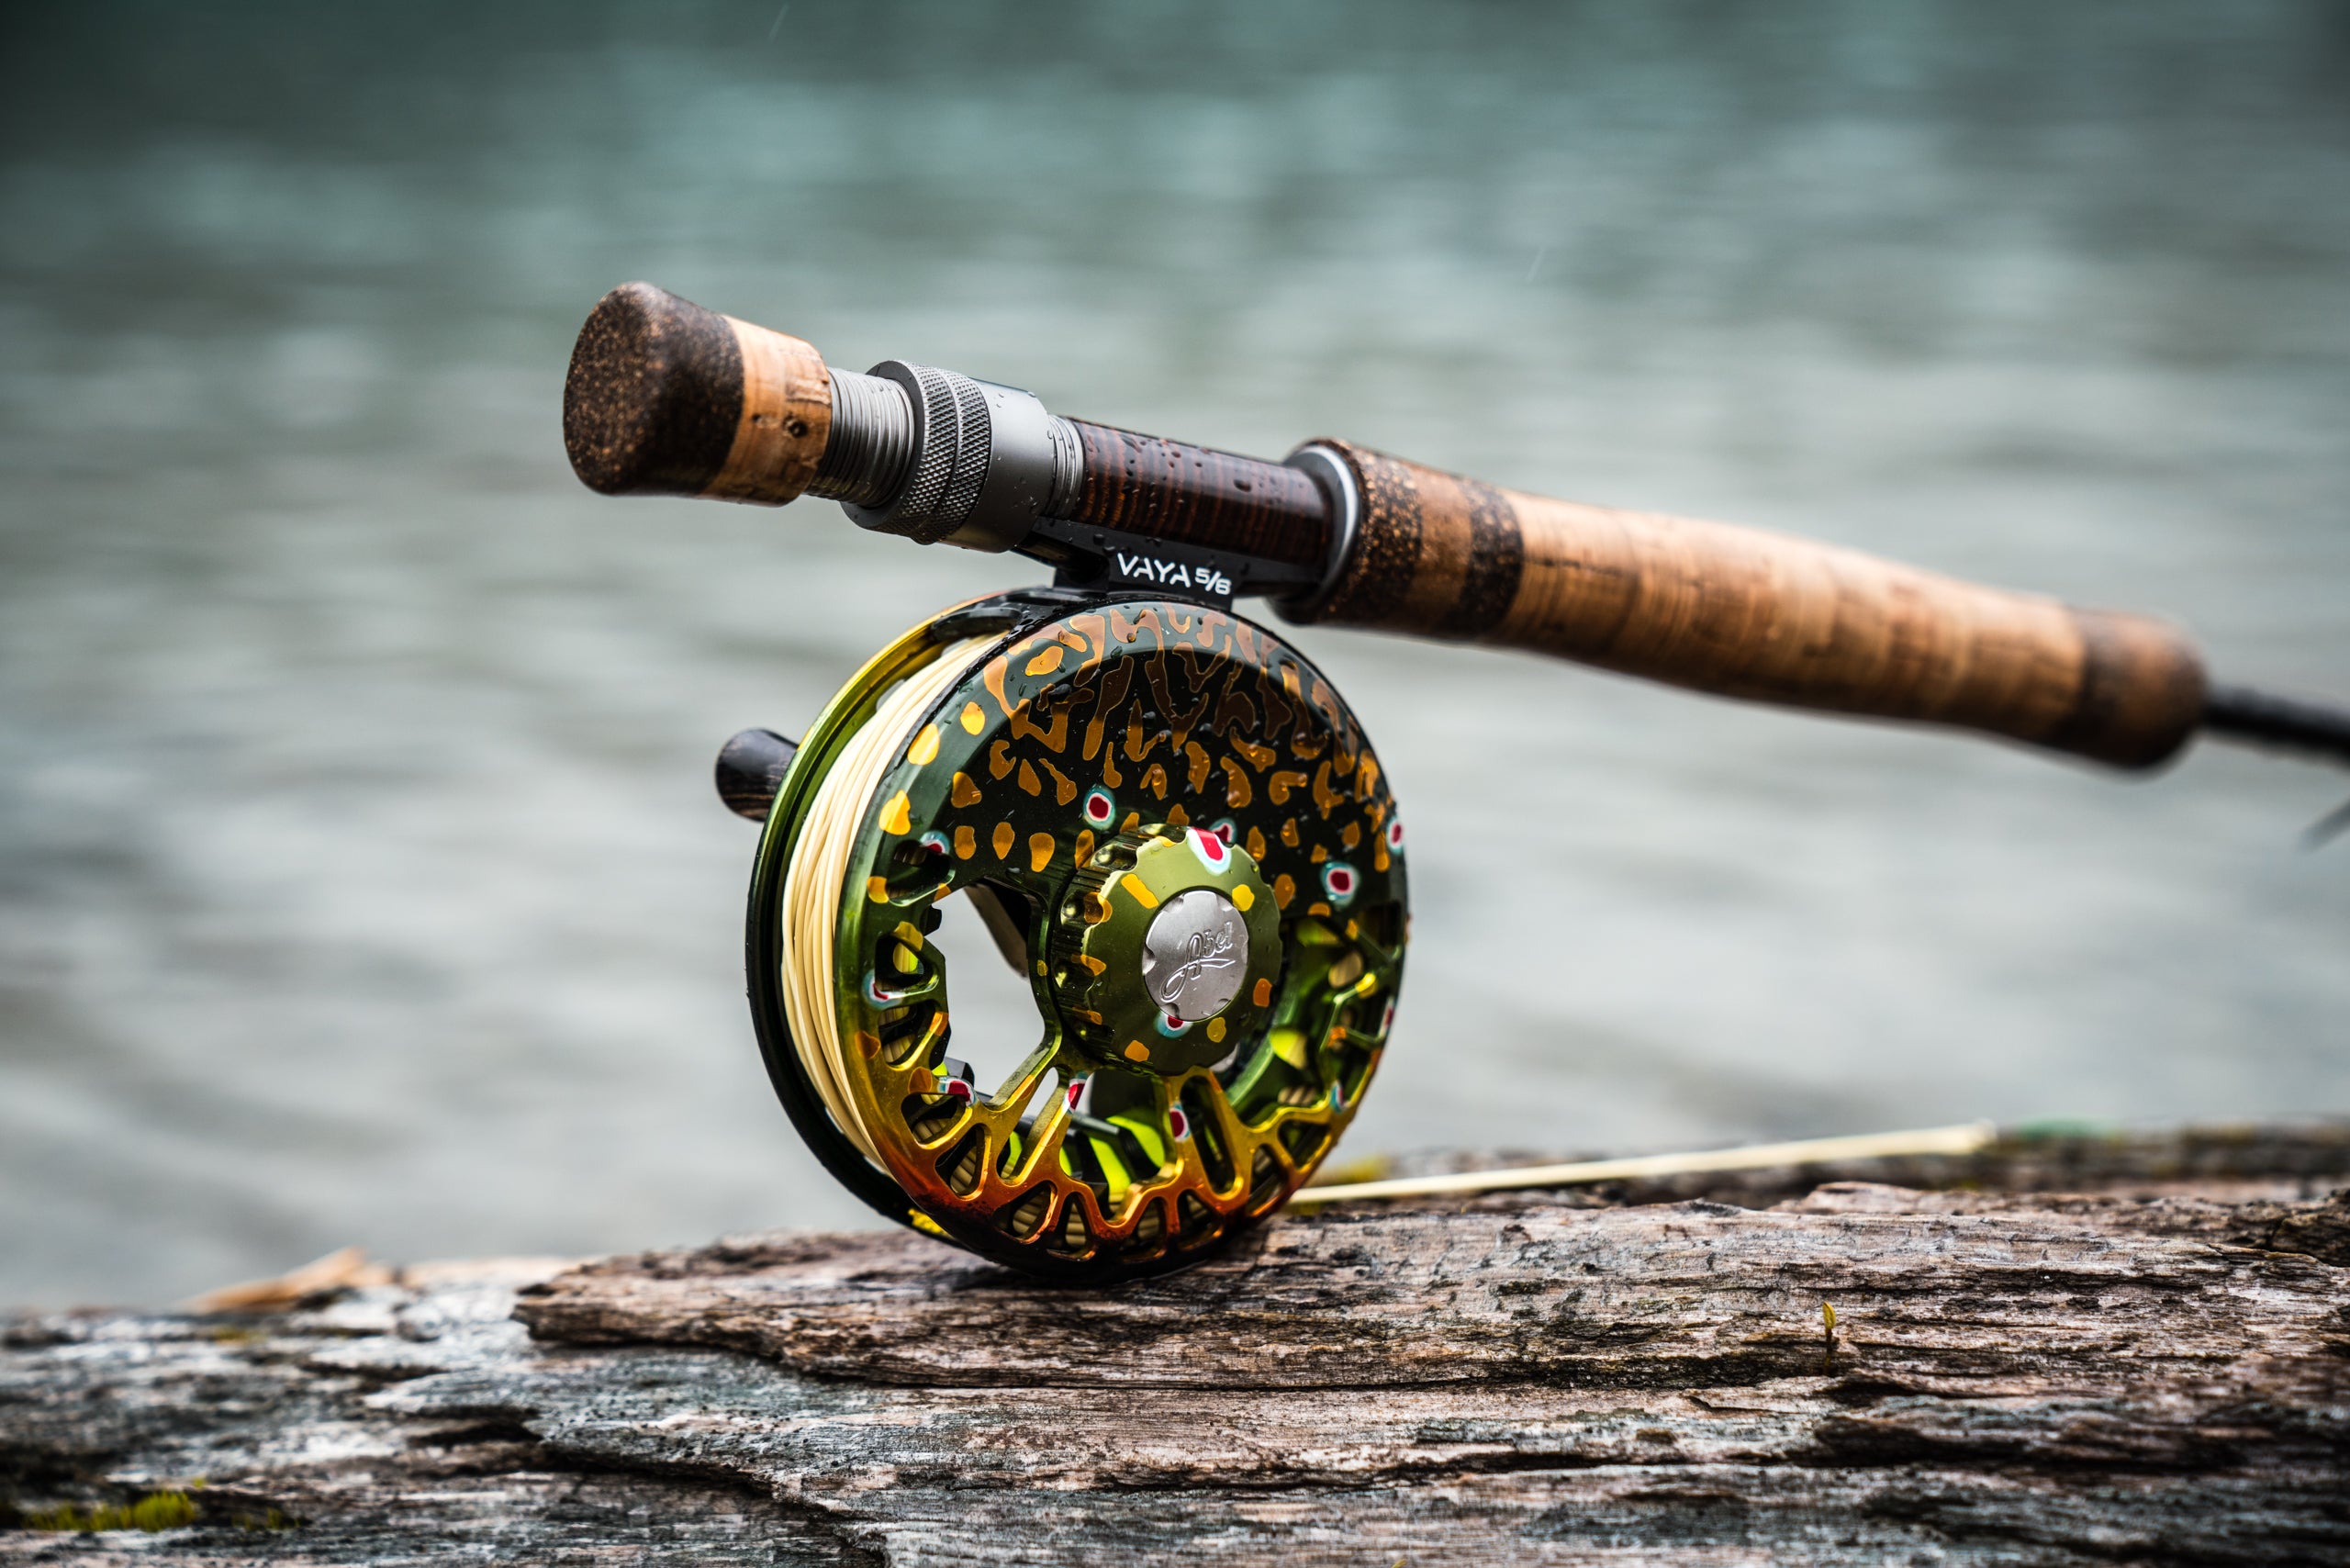 Fly Rod and Reel  Stone Creek Outfitters